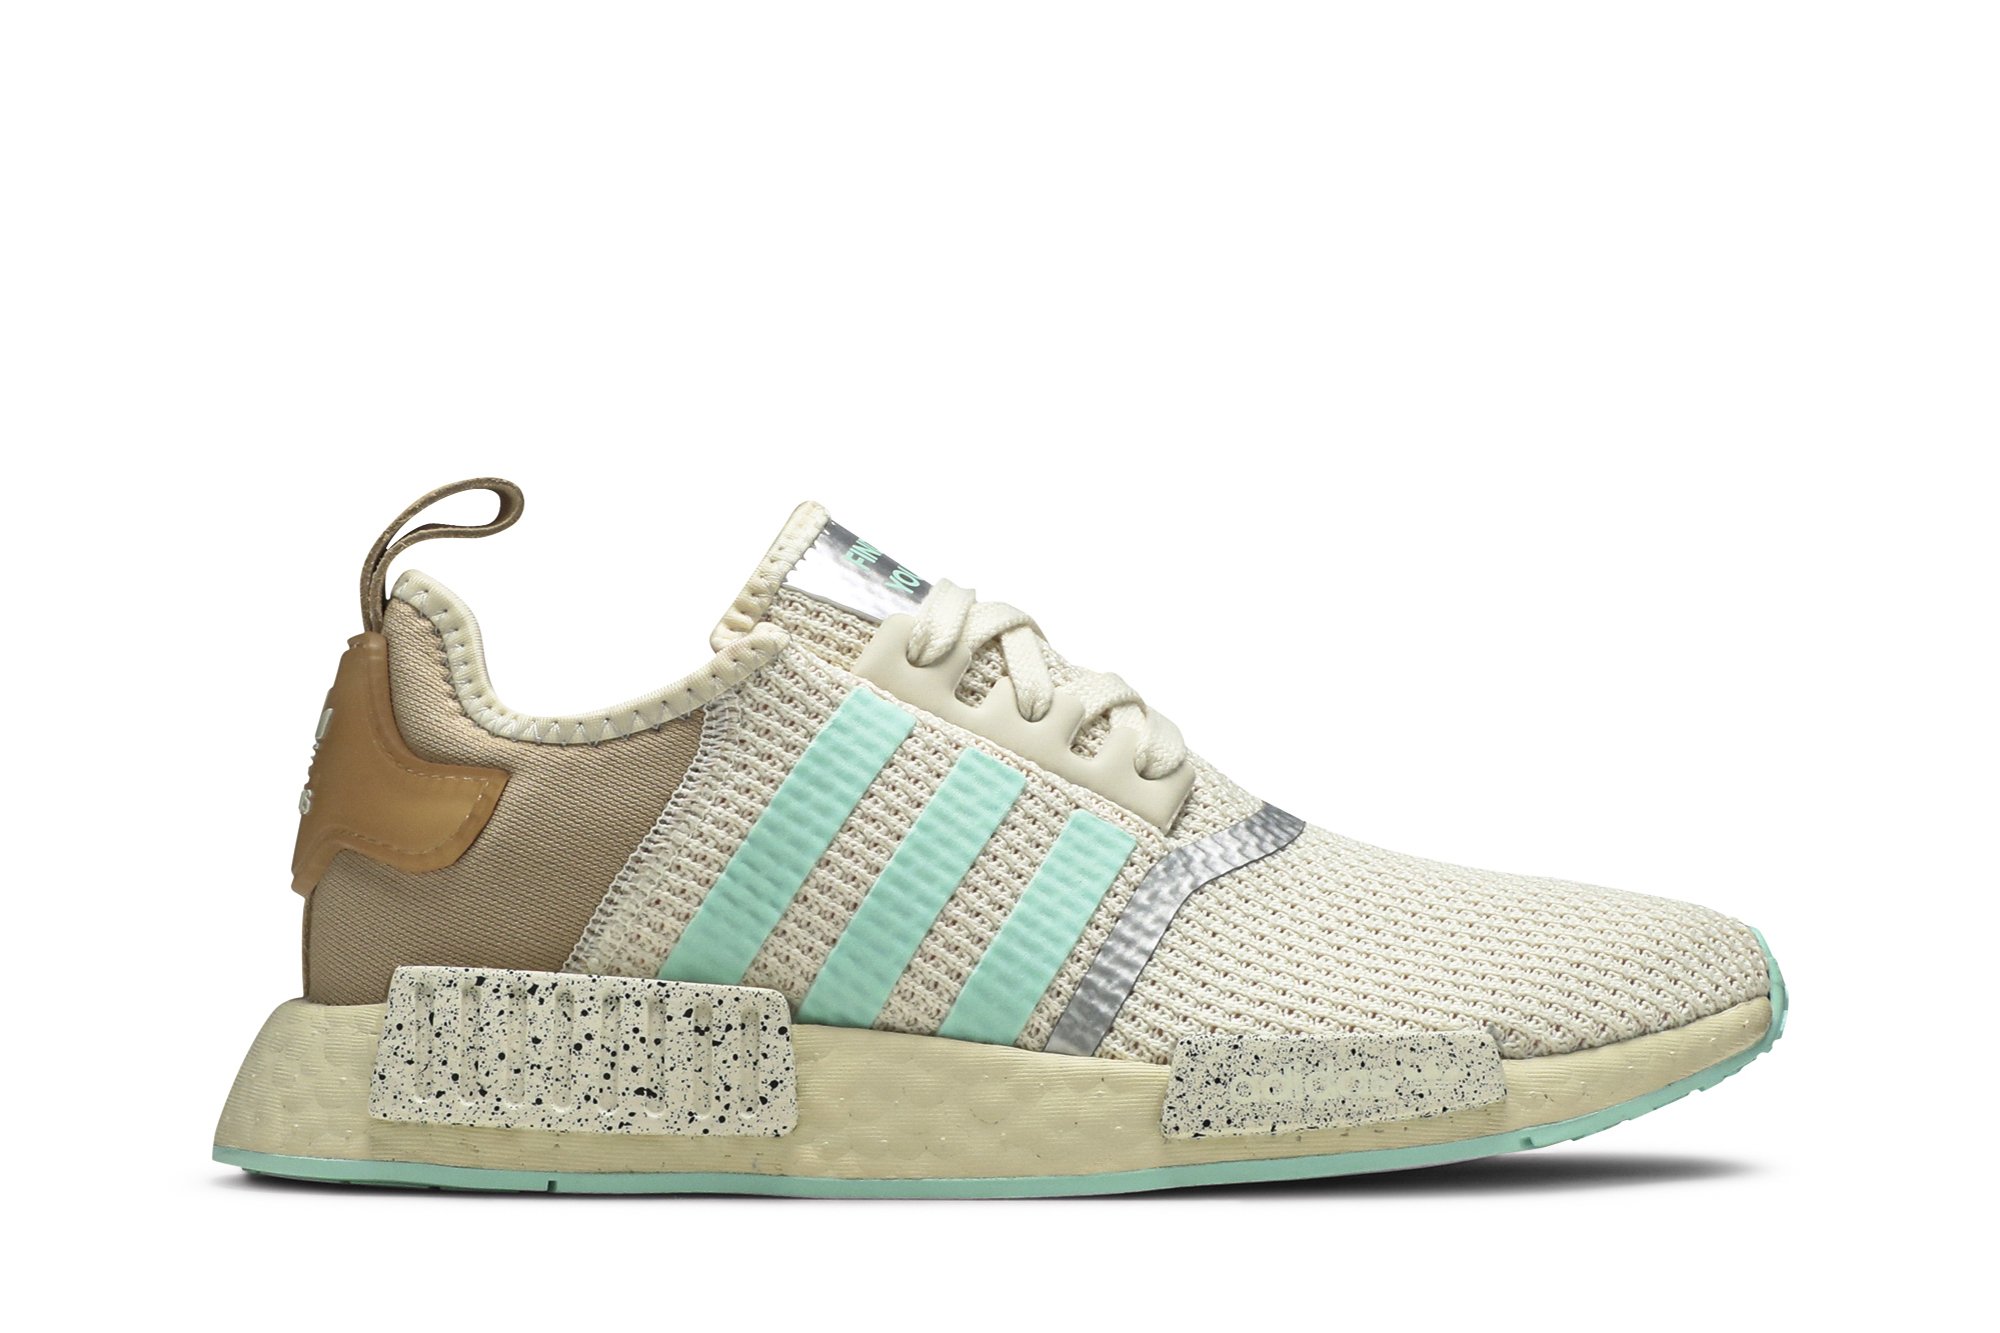 Buy Star Wars x Wmns NMD_R1 'The Child - Find Your Way' - GZ2758 | GOAT